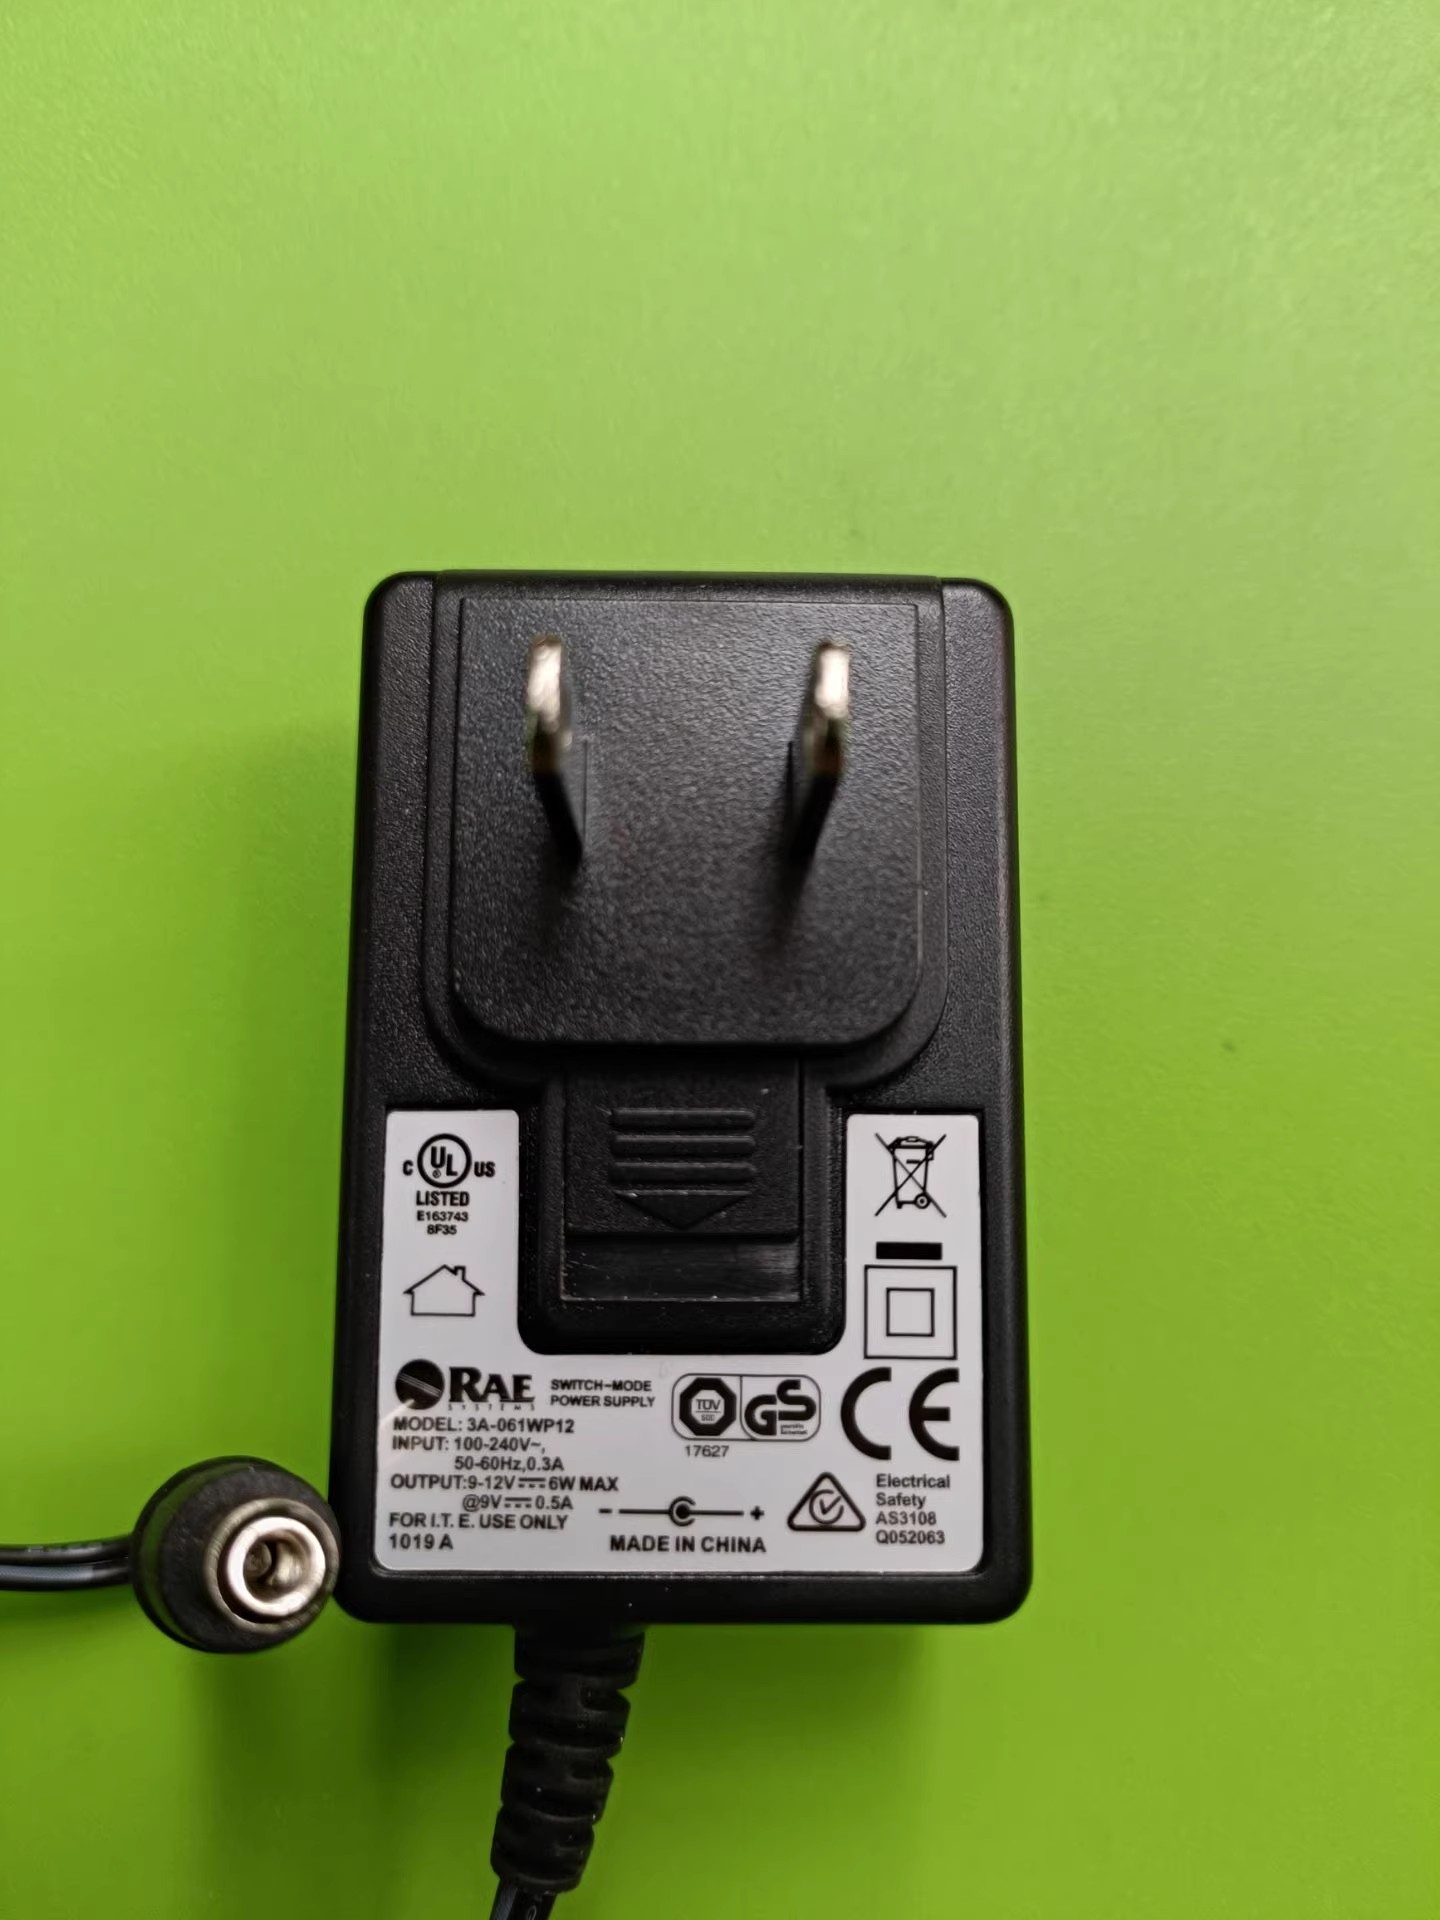 *Brand NEW* 3A-061WP12 RAE 9V 0.5A AC DC ADAPTHE POWER Supply